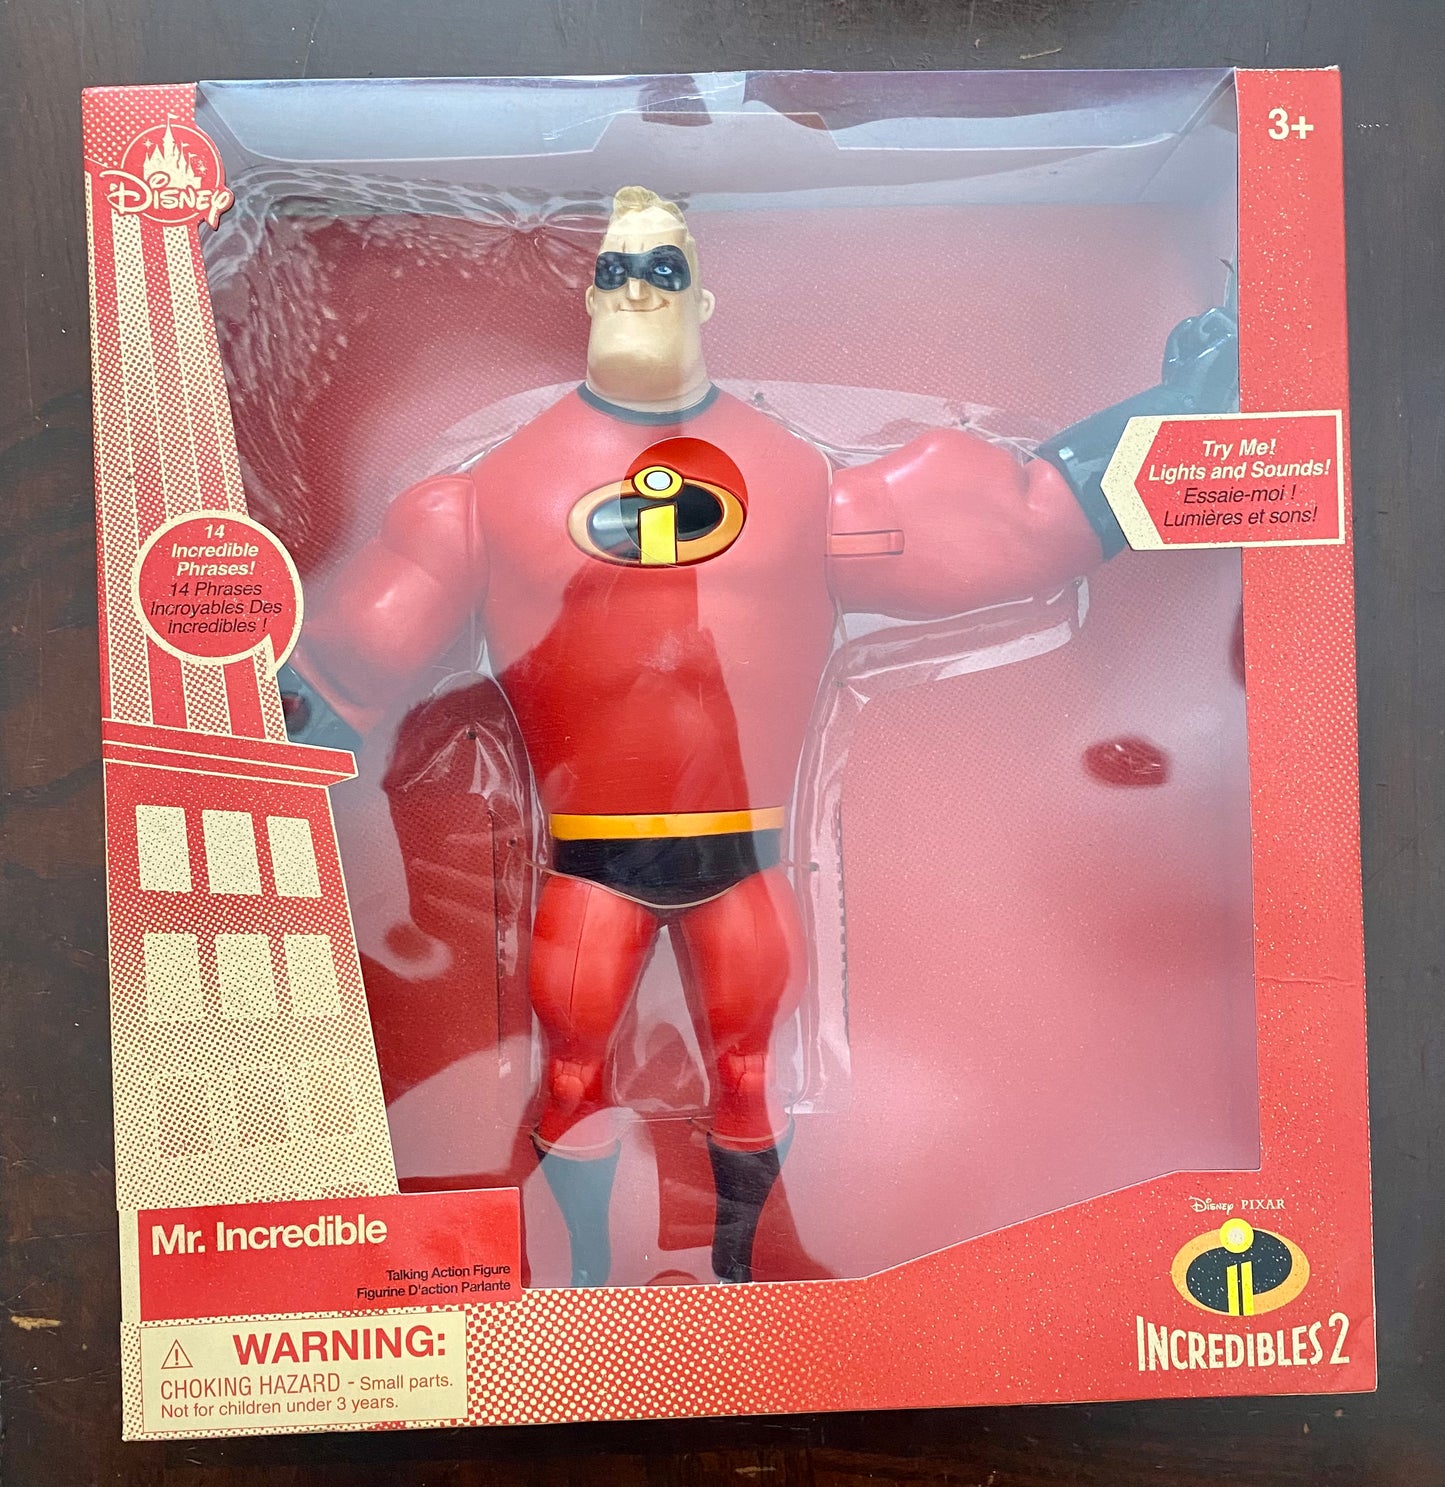 Disney Store The Incredibles 2 Mr. Incredible Light-Up Talking Action Figure